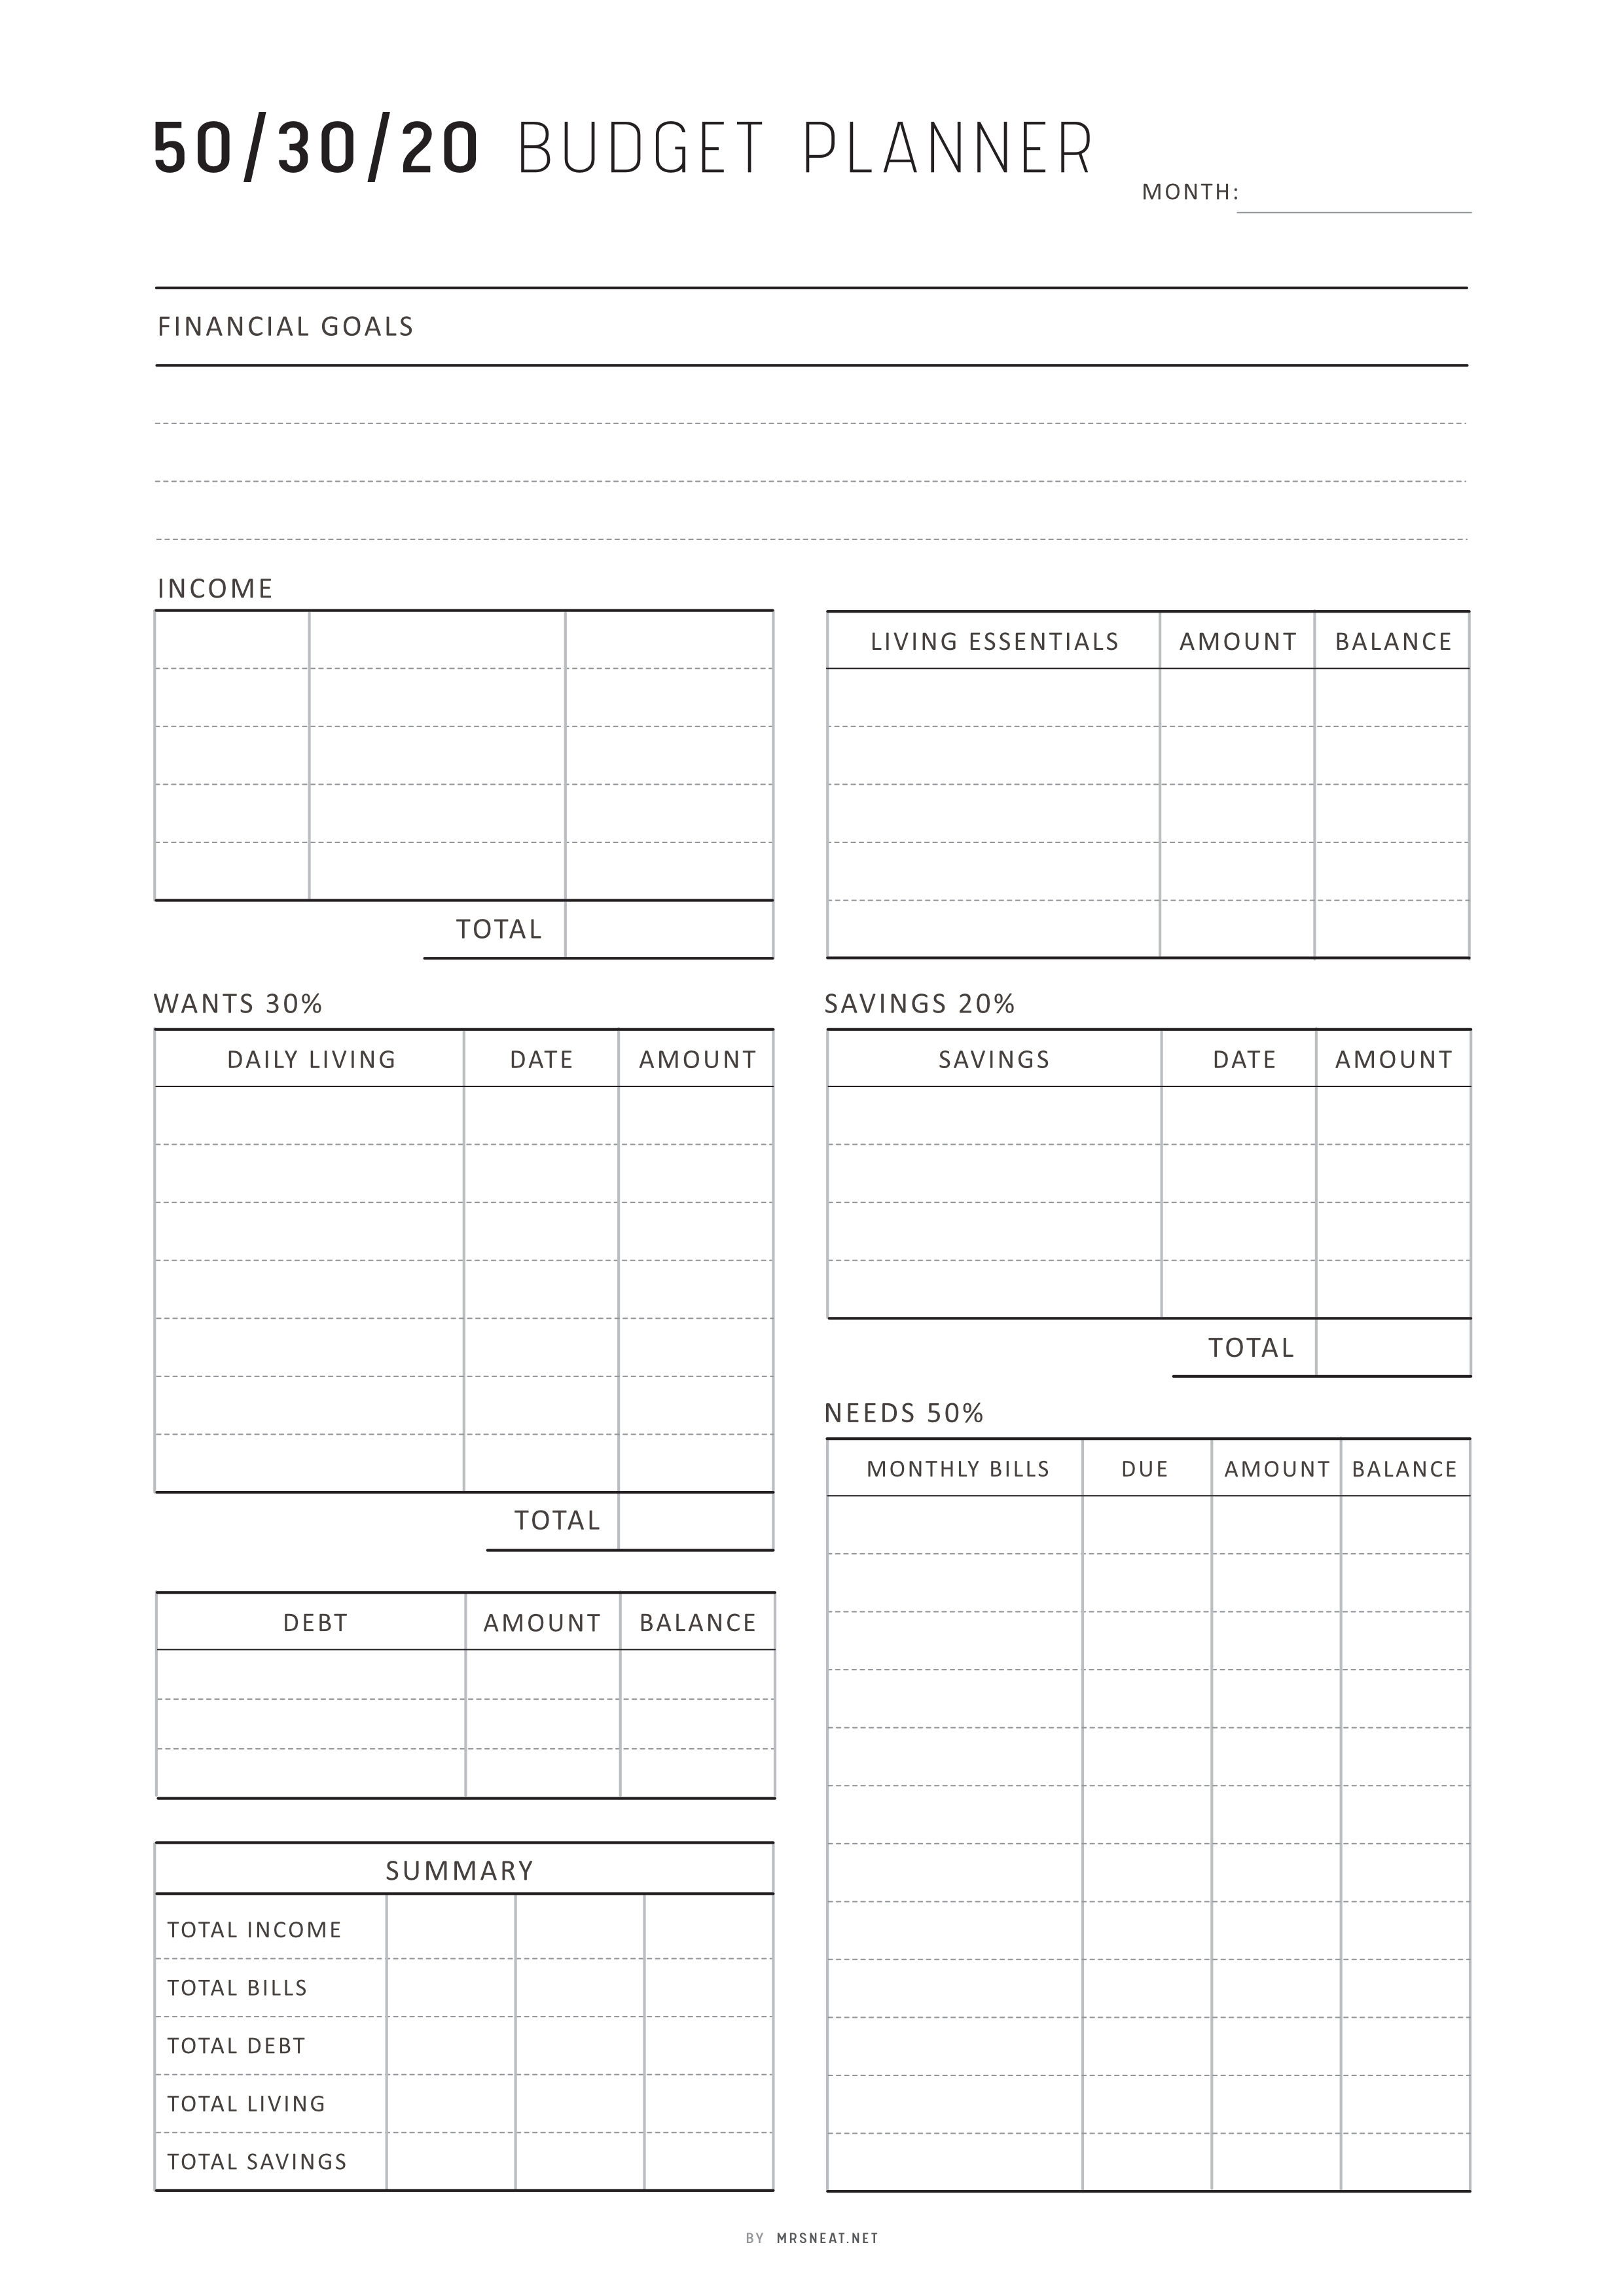 Complete Budget Template Printable